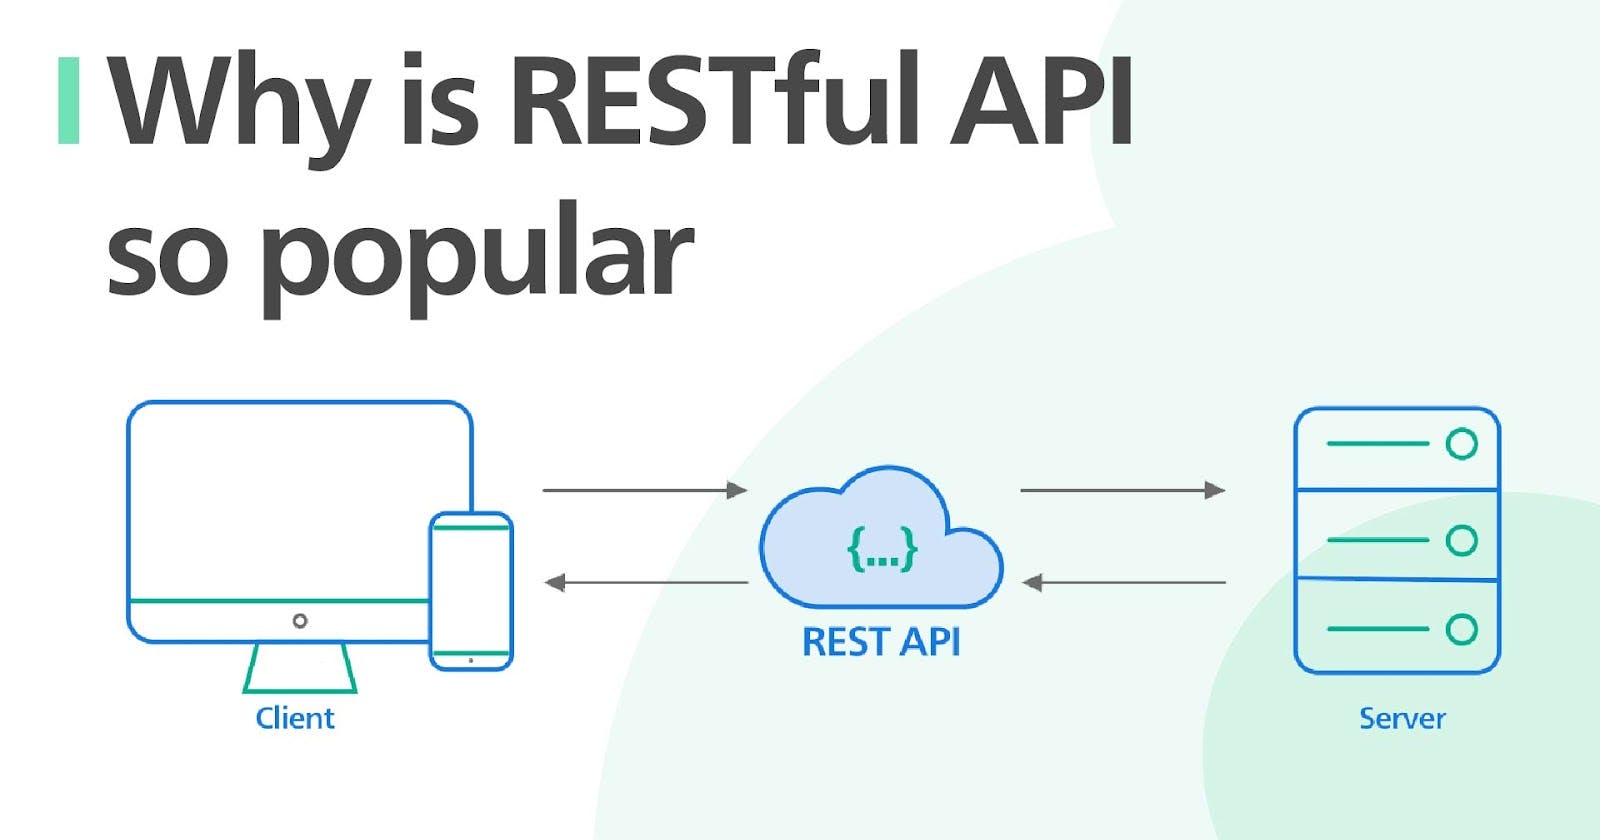 What is REST API?